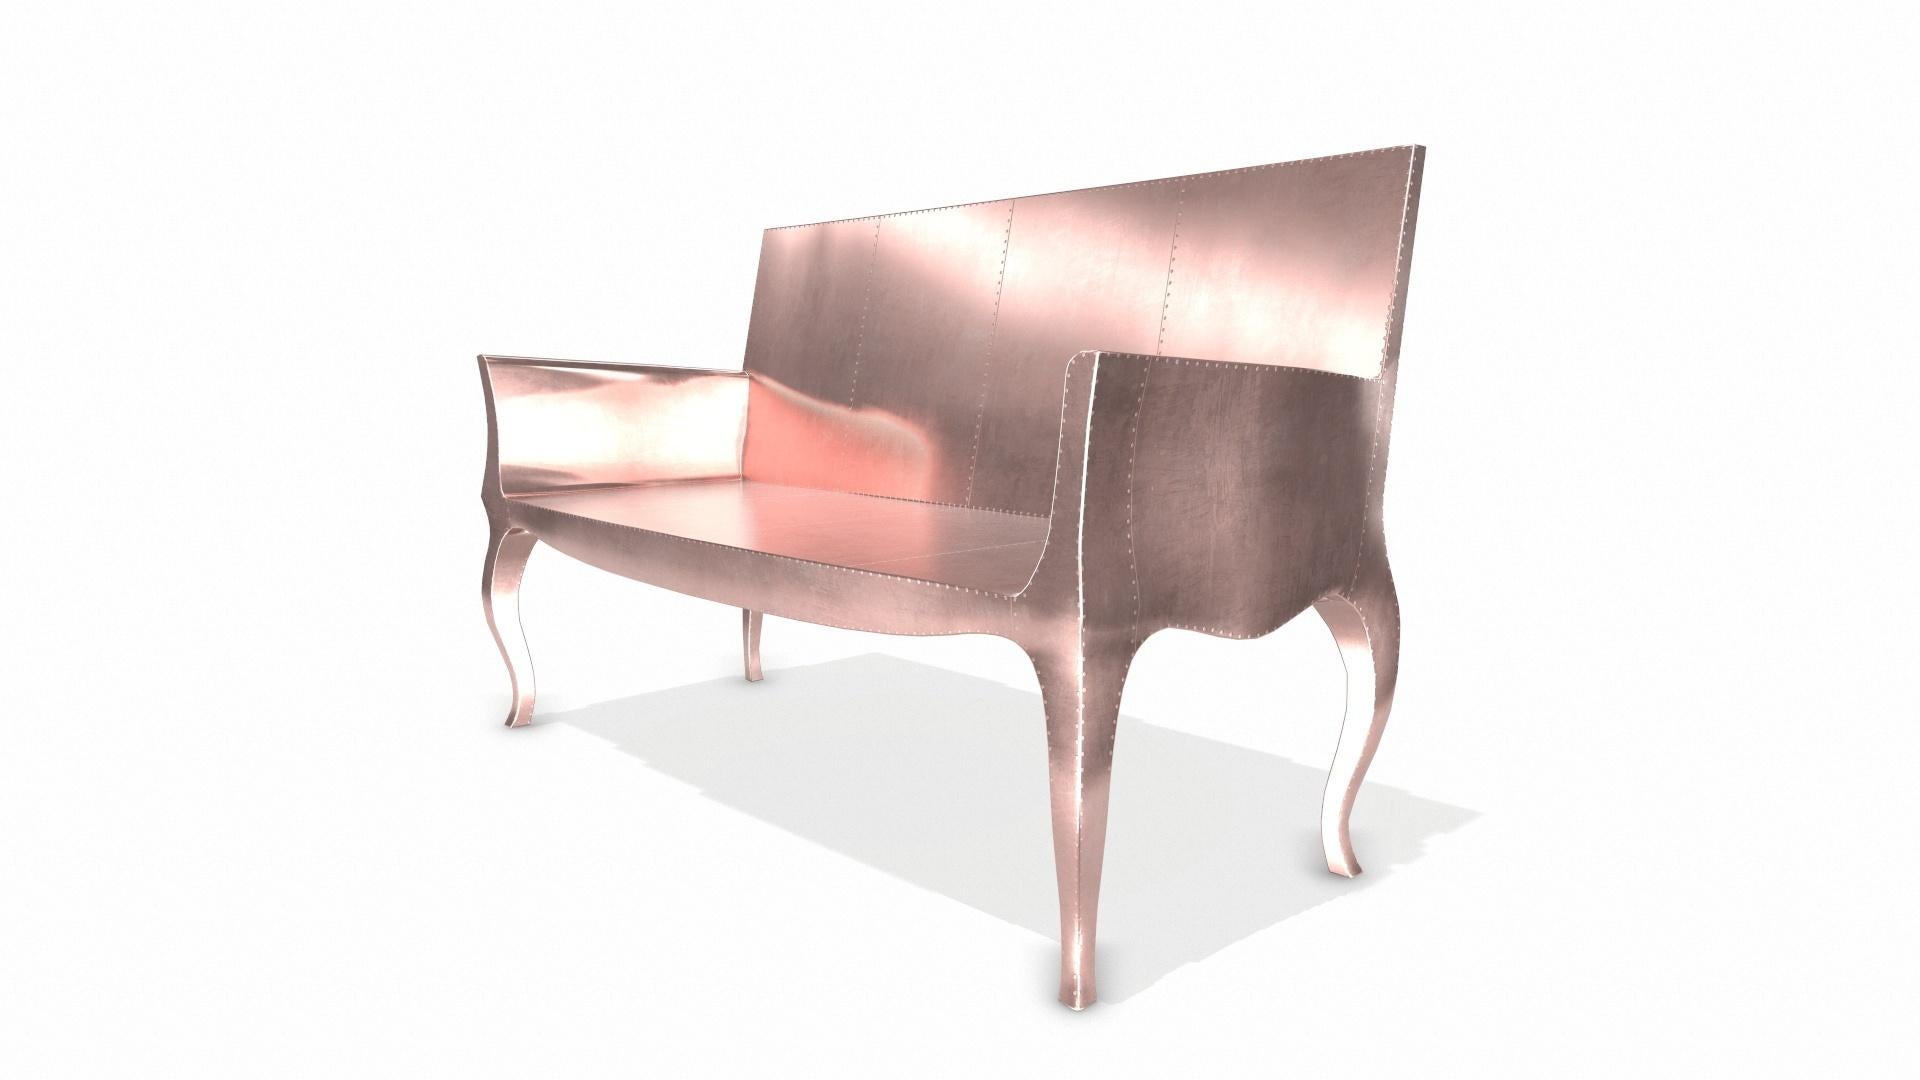 Hand-Crafted Louise Settee Art Deco Settees in Smooth Copper by Paul Mathieu for S Odegard For Sale